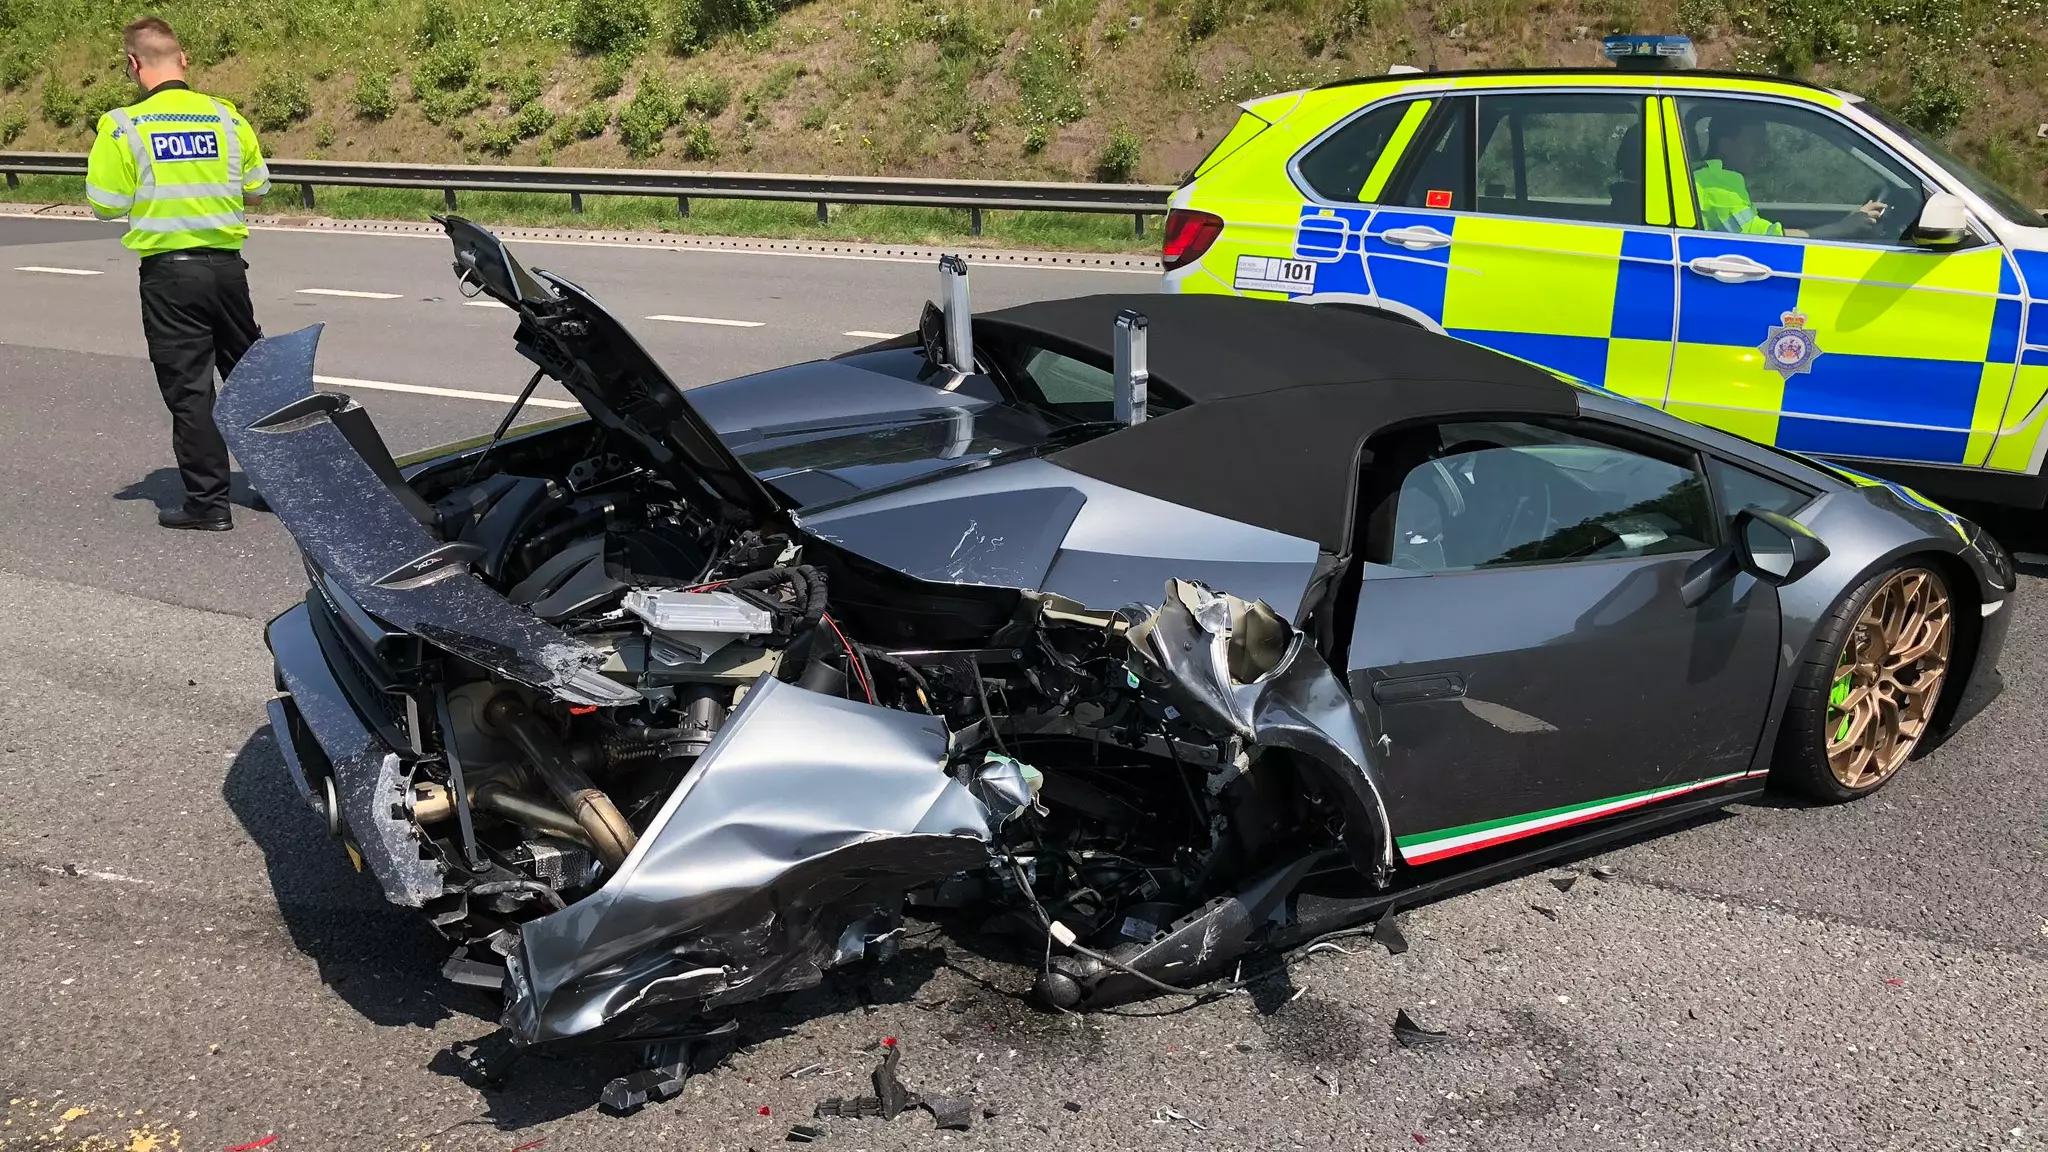 Brand New Lamborghini Wrecked In Motorway Crash Just 20 Minutes After Purchase